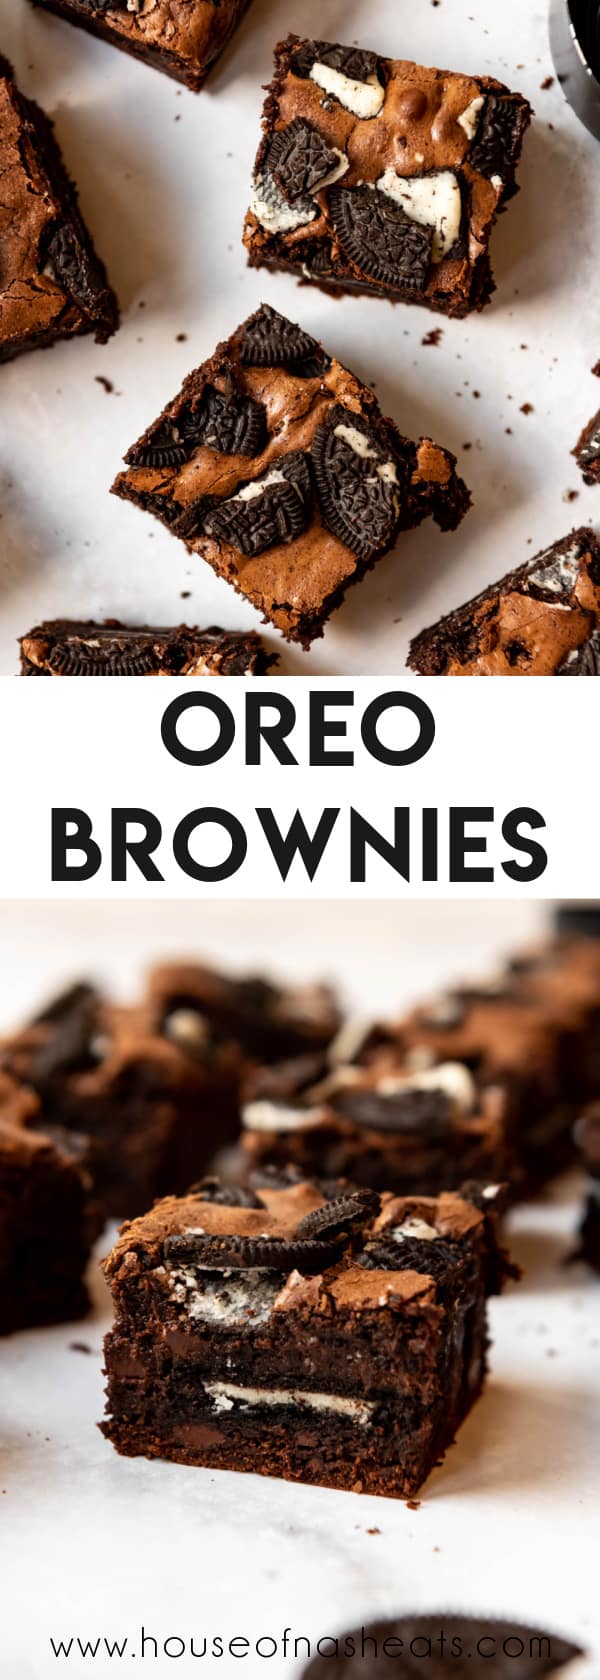 A collage of images of Oreo brownies with text overlay.